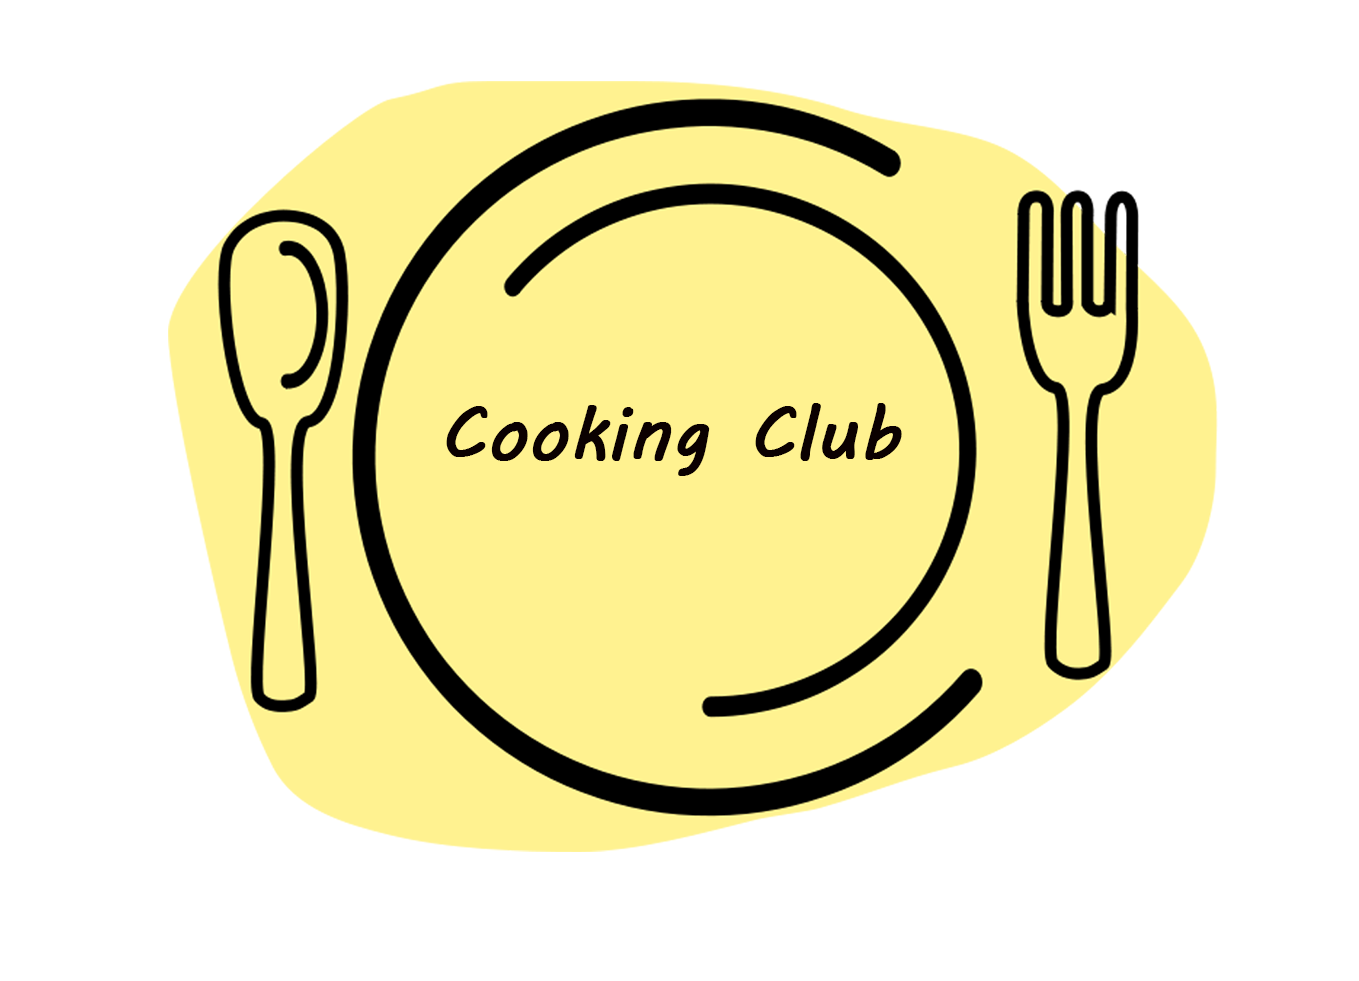 Cooking Club logo graphic